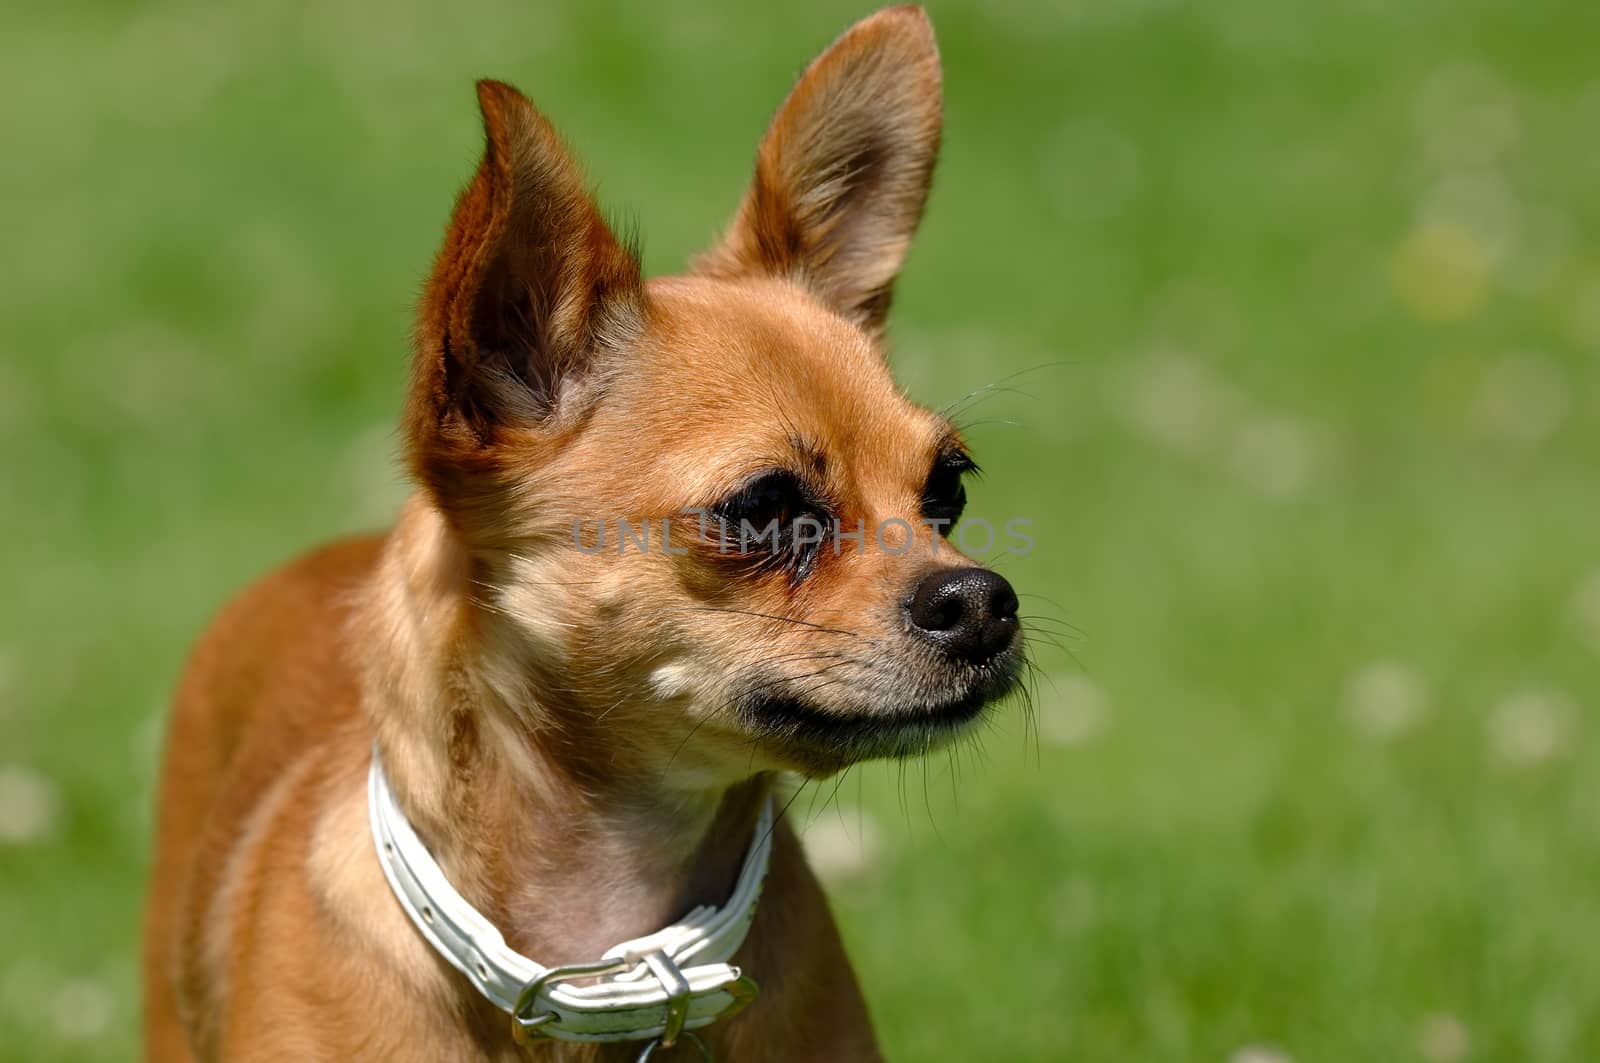 Chihuahua dog on green grass by cfoto